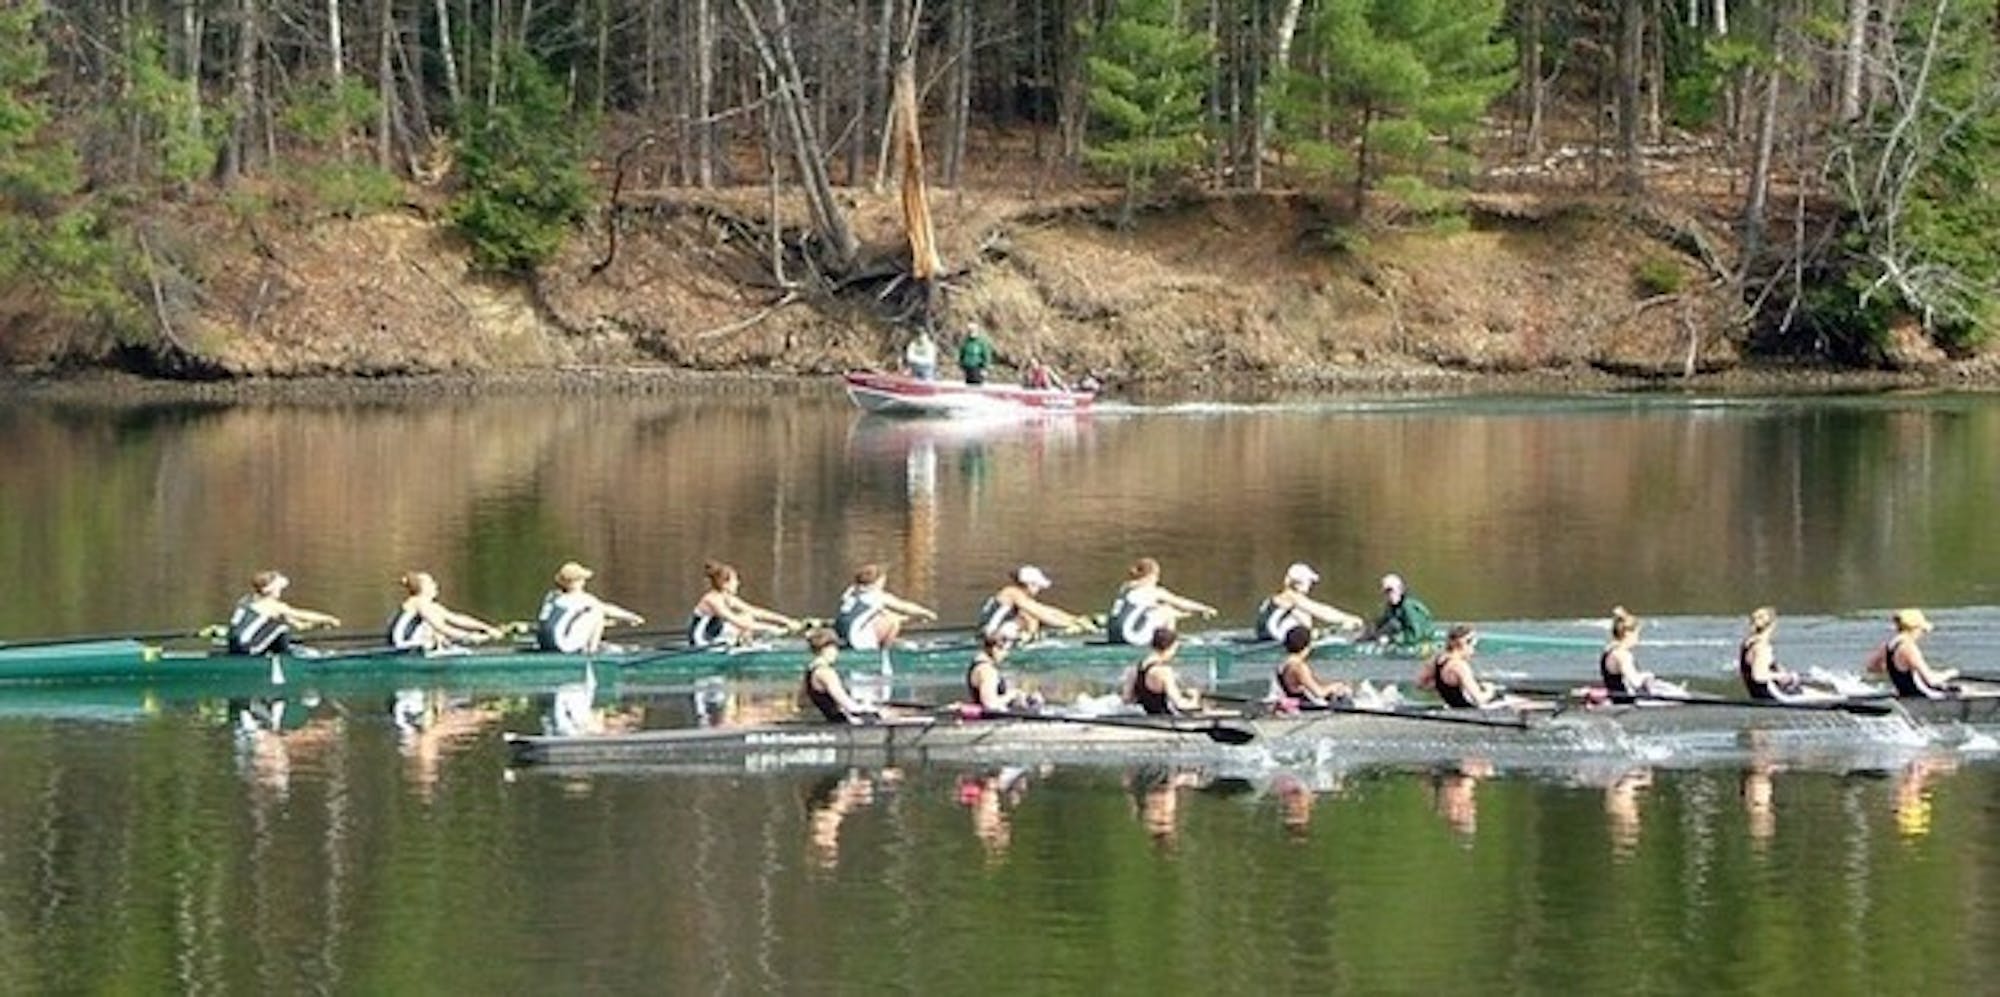 The women's rowing team overtook Radcliffe for the first time since 1998.